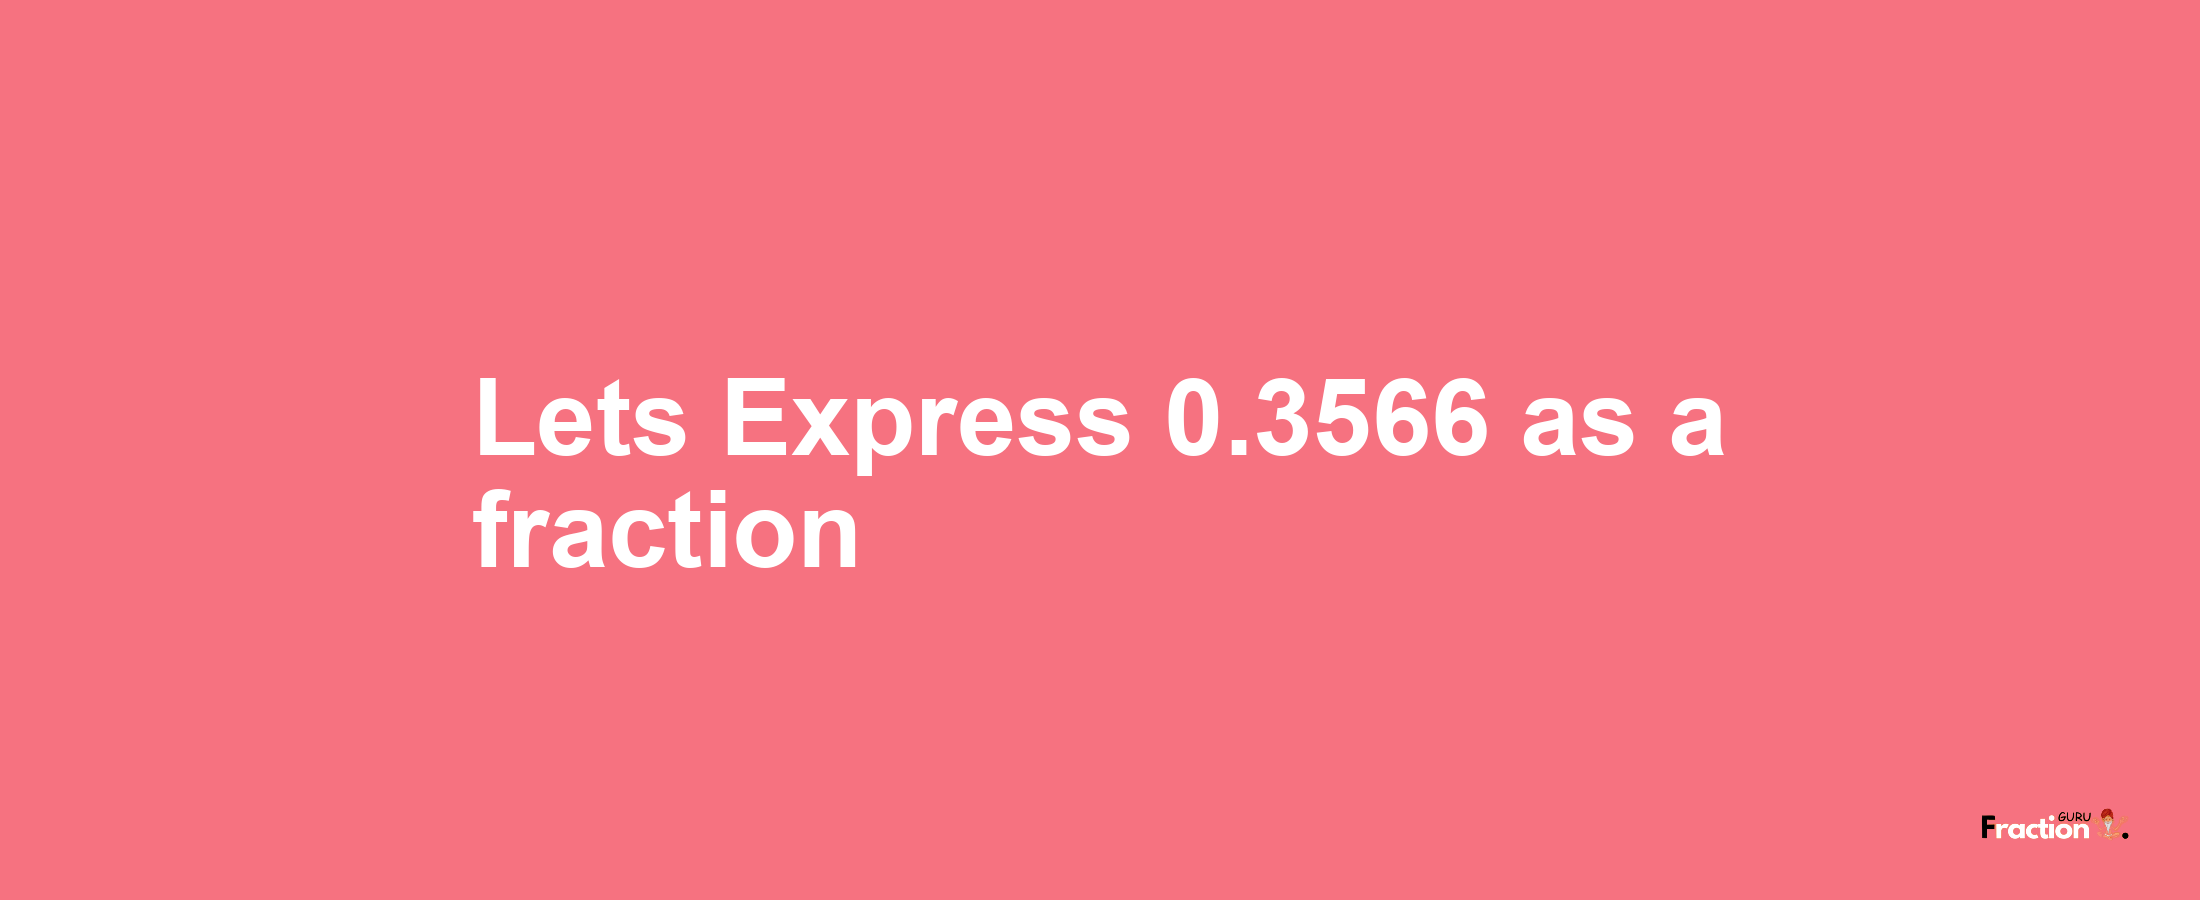 Lets Express 0.3566 as afraction